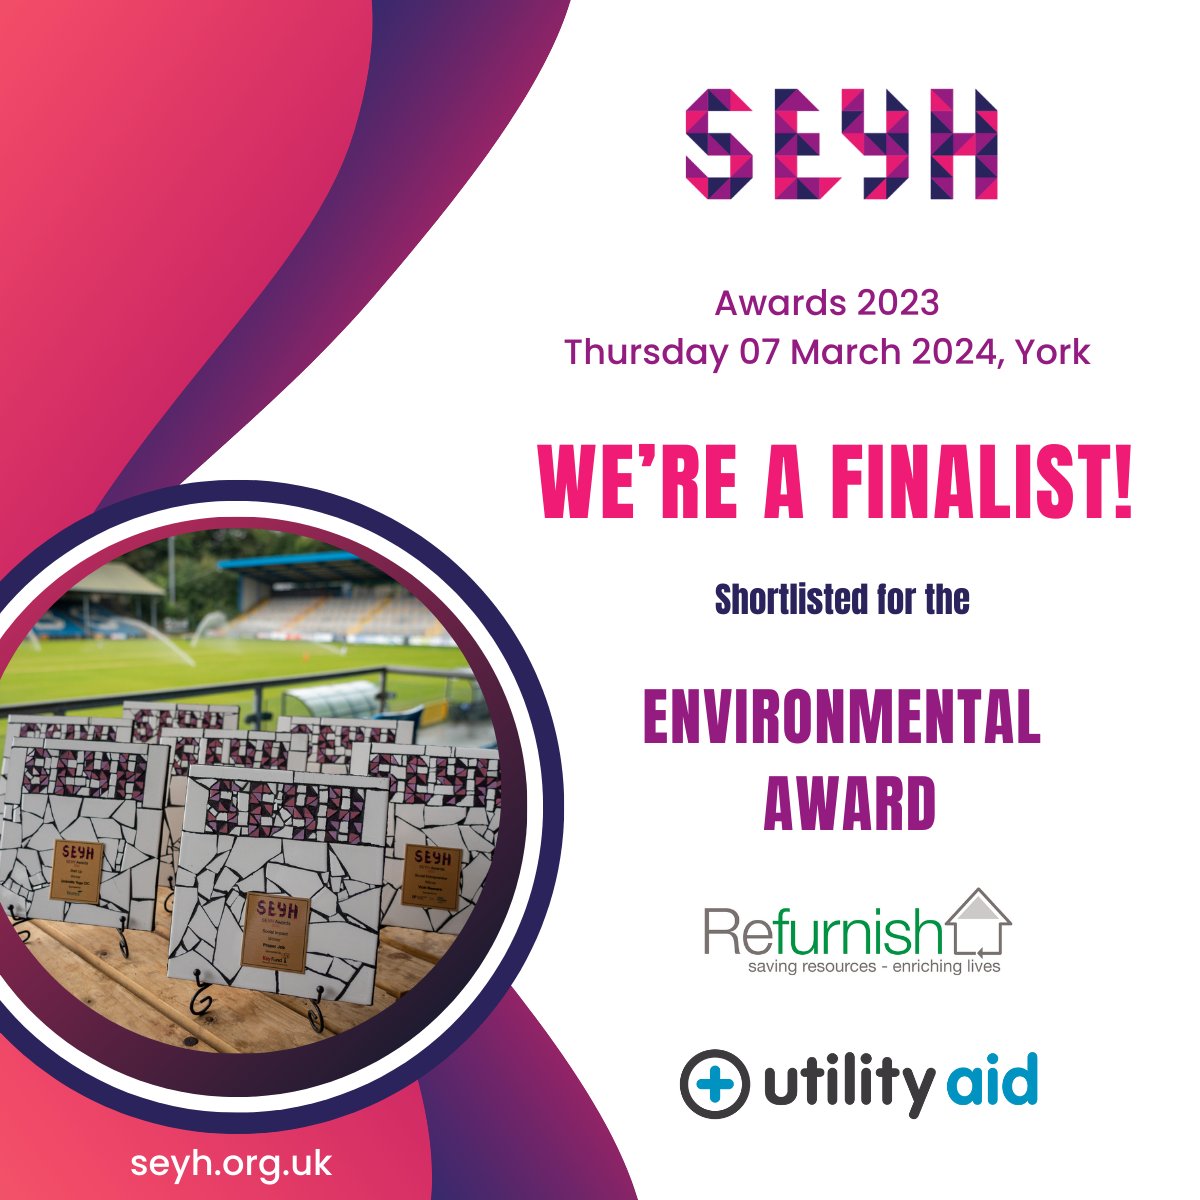 We're finalists!🎉 We've been shortlisted for the Environmental Award at @SocialEnterprYH Awards 2023. #SEYHawards